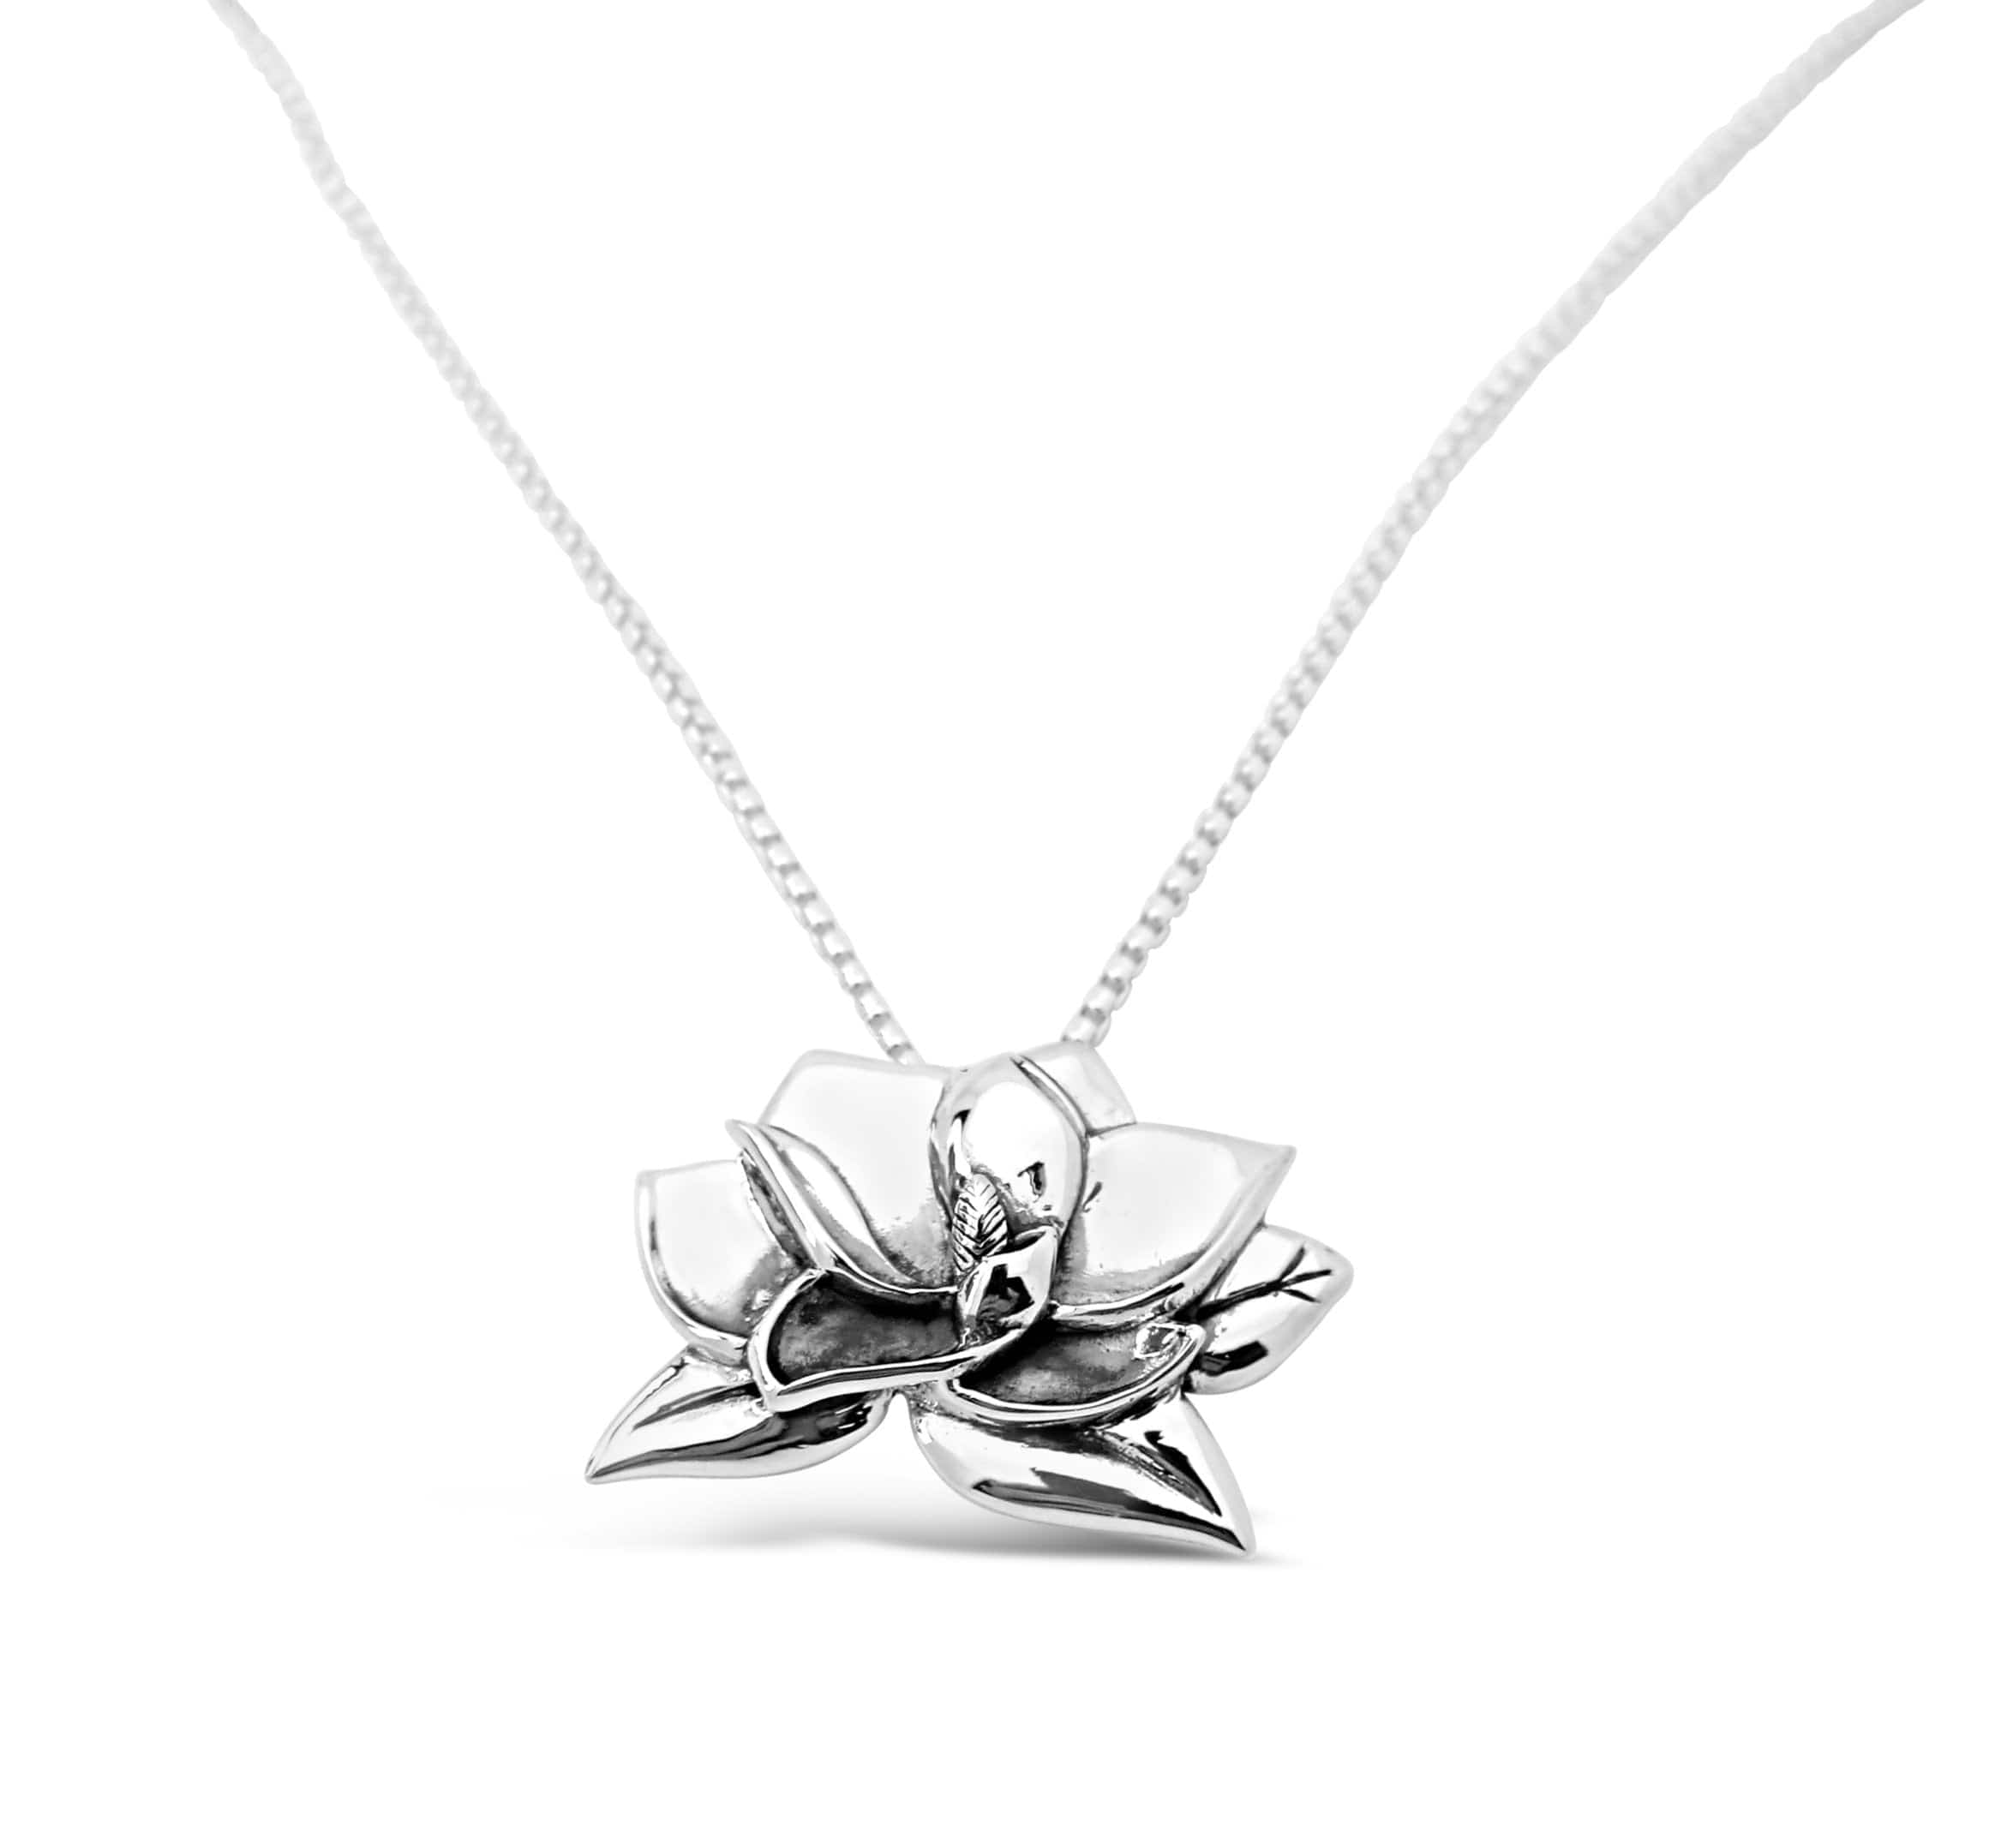 Cristy Cali Cristy Cali Large Magnolia Pendant Necklace - Little Miss Muffin Children & Home